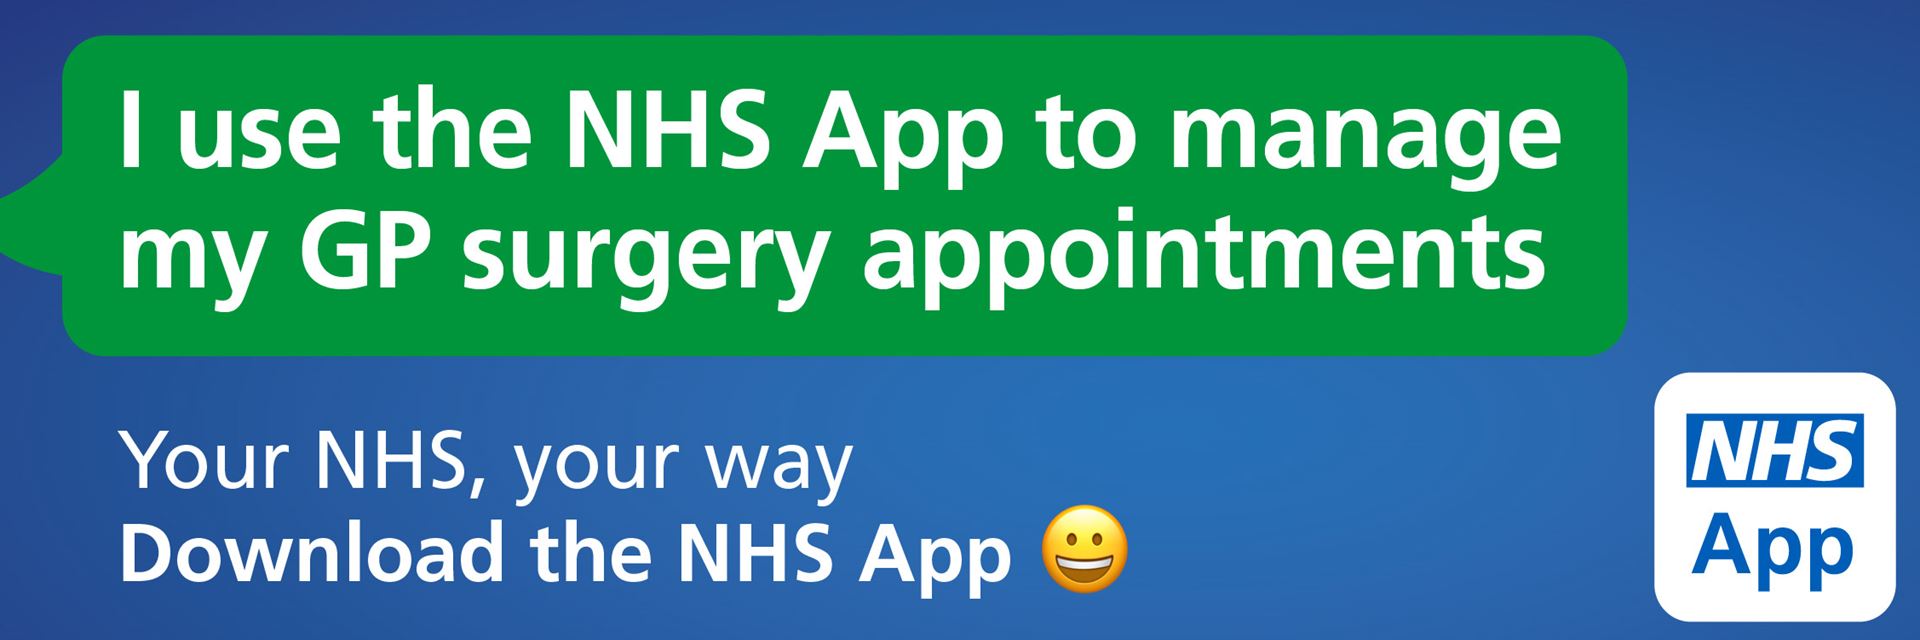 NHS App appointments